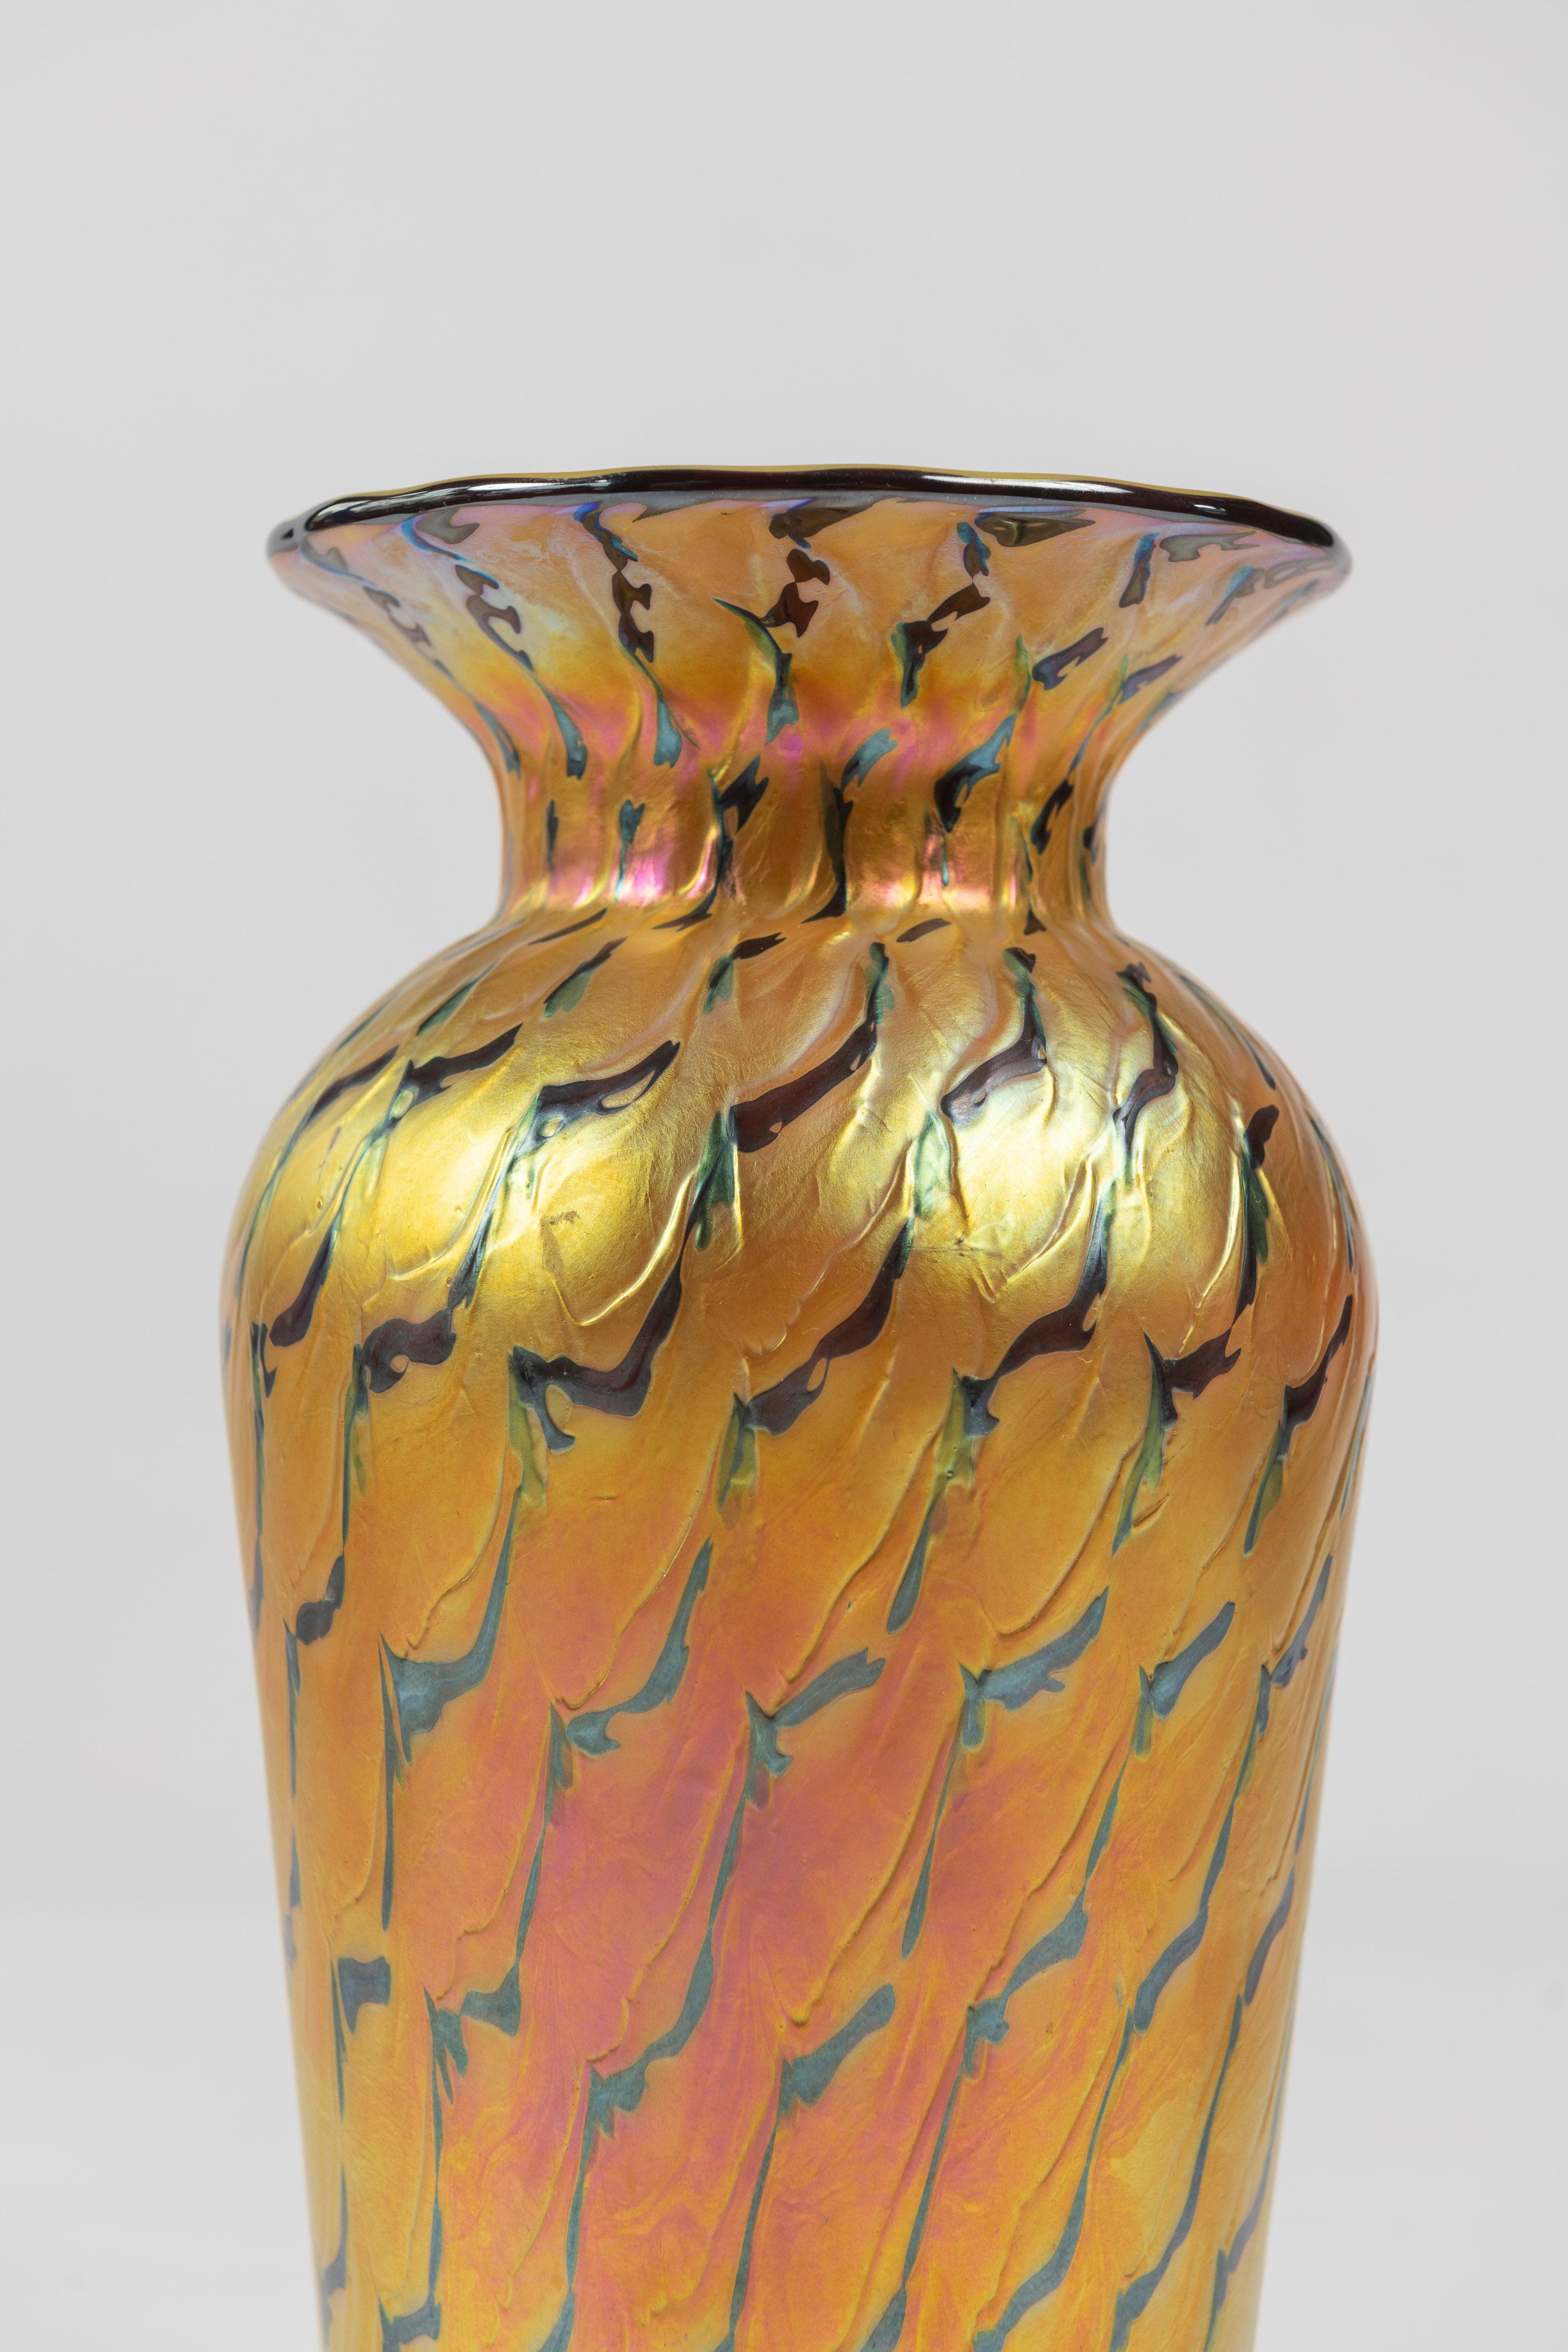 Contemporary Gold and Green Iridescent Art Glass Vase, Lundberg Studios of California, Signed For Sale